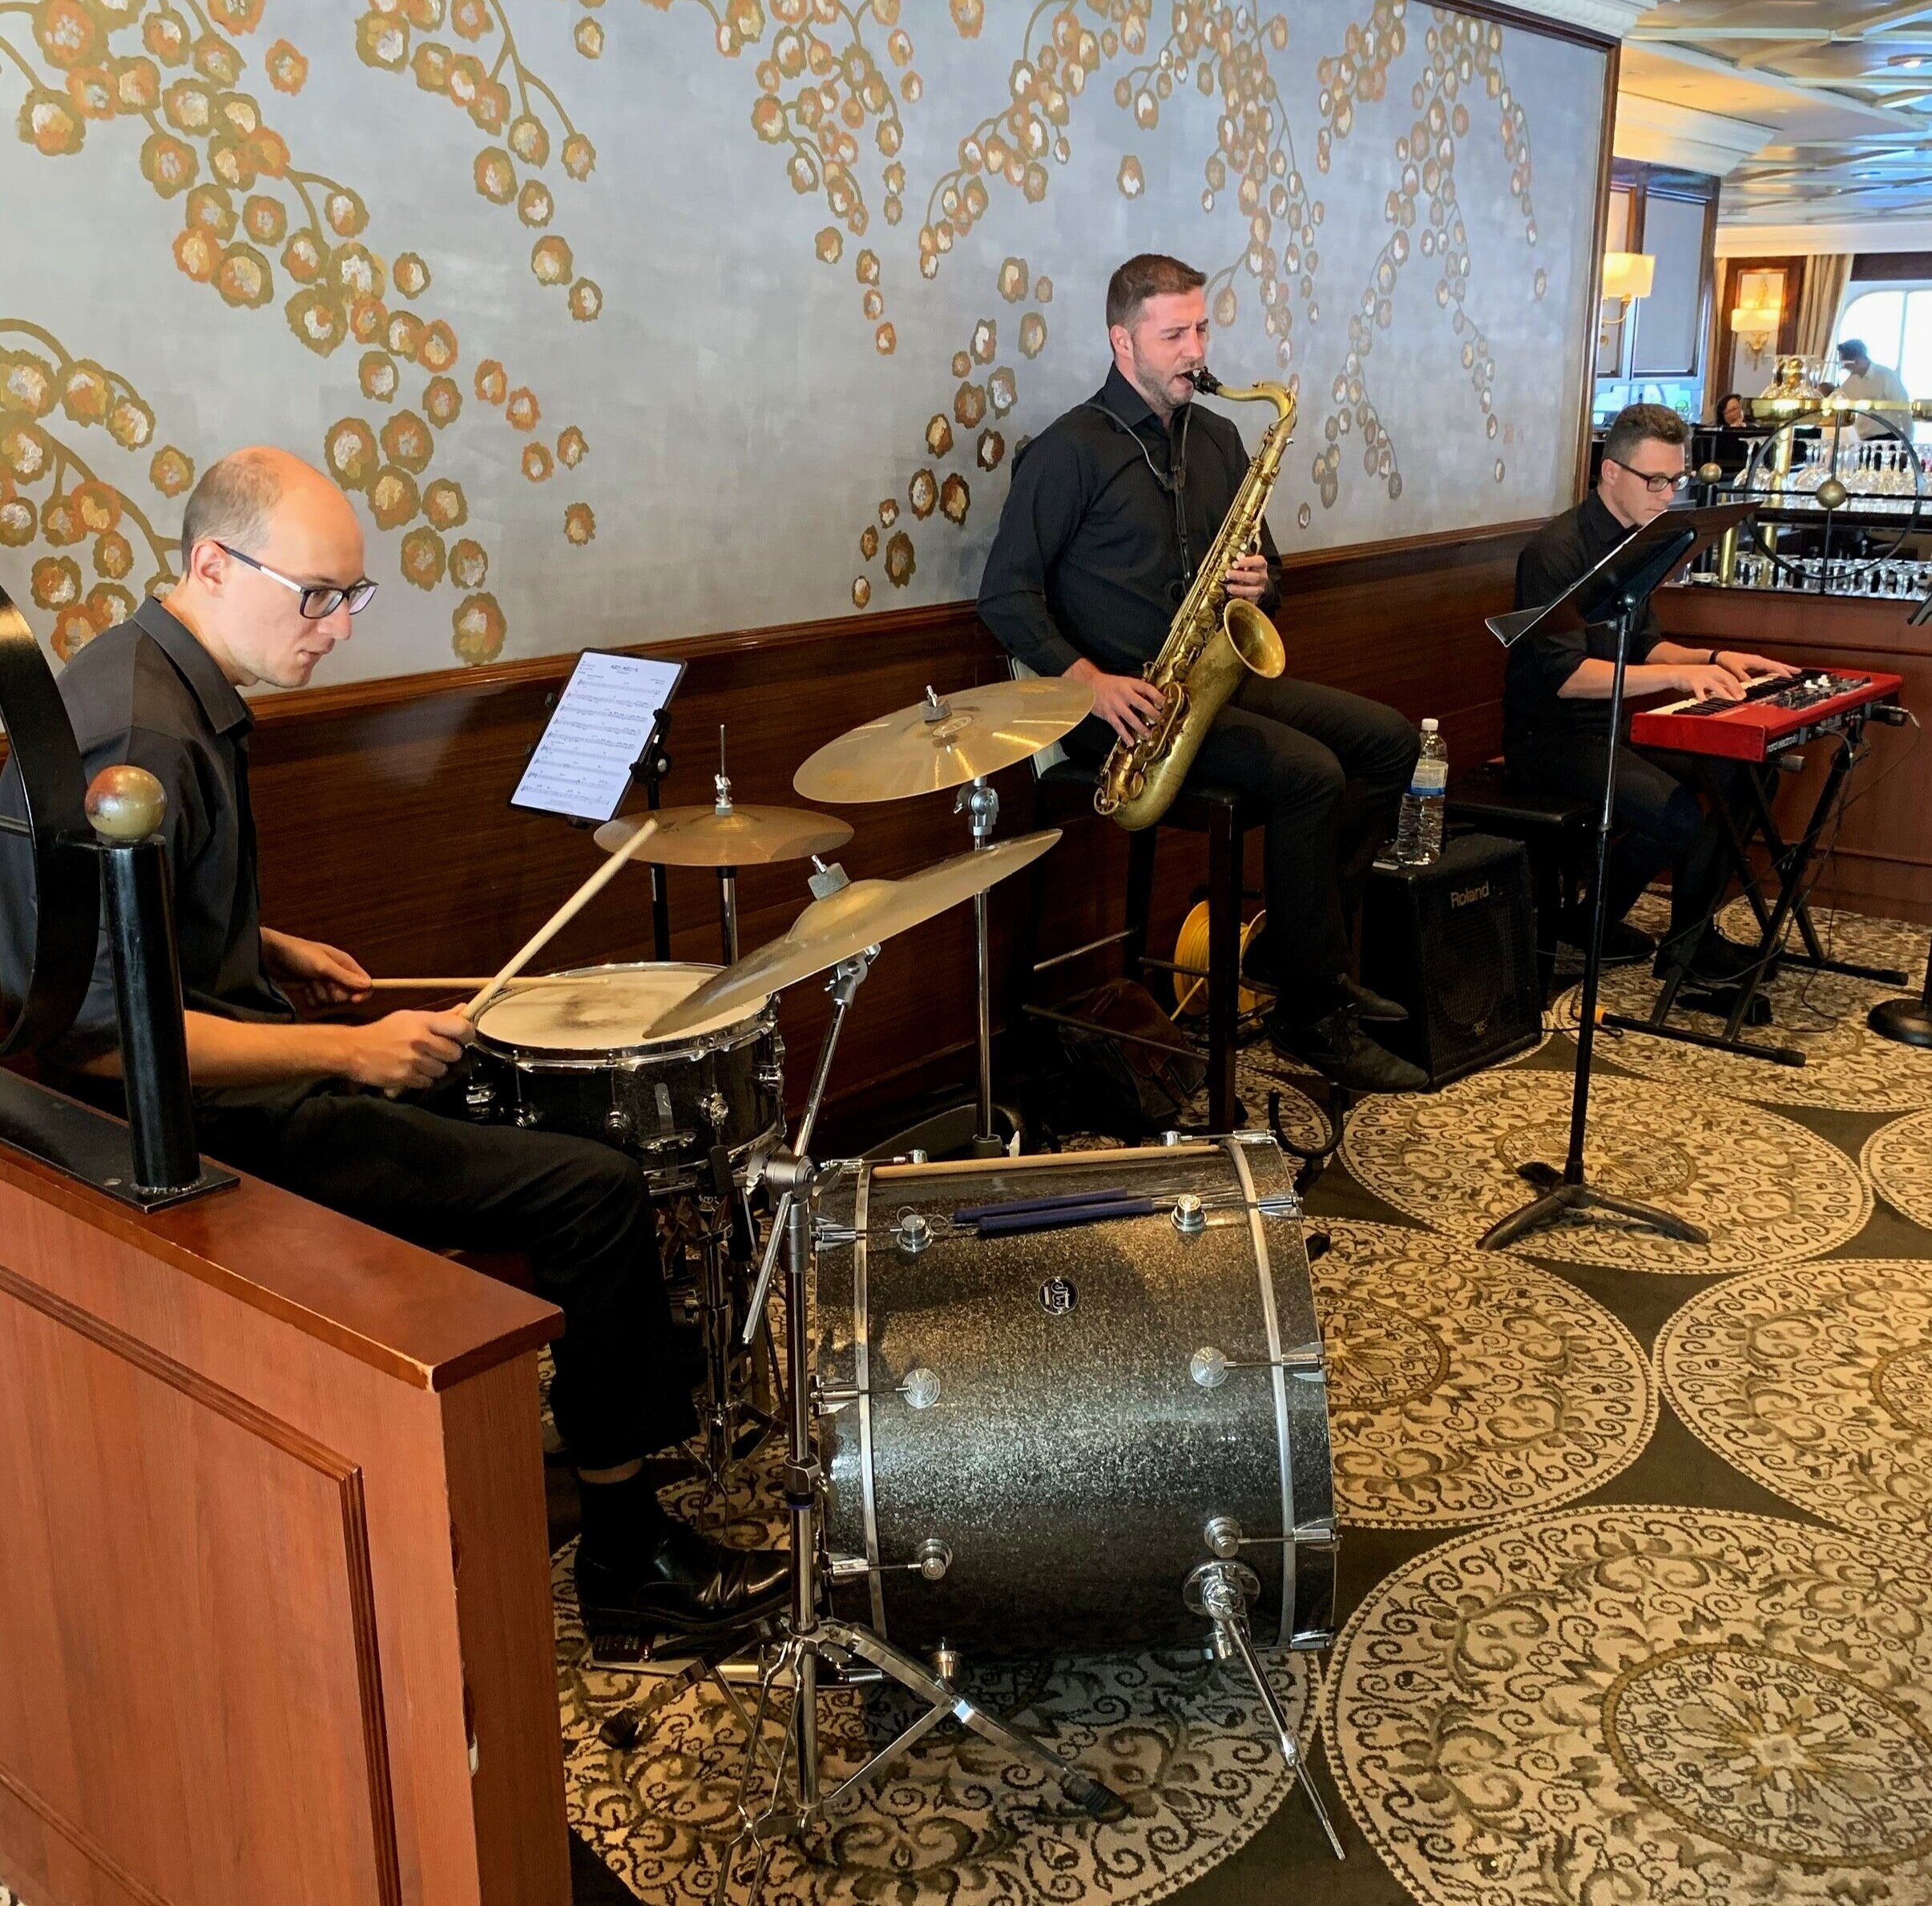  Brunch entertainment in the form of smooth jazz, from the ships band. 